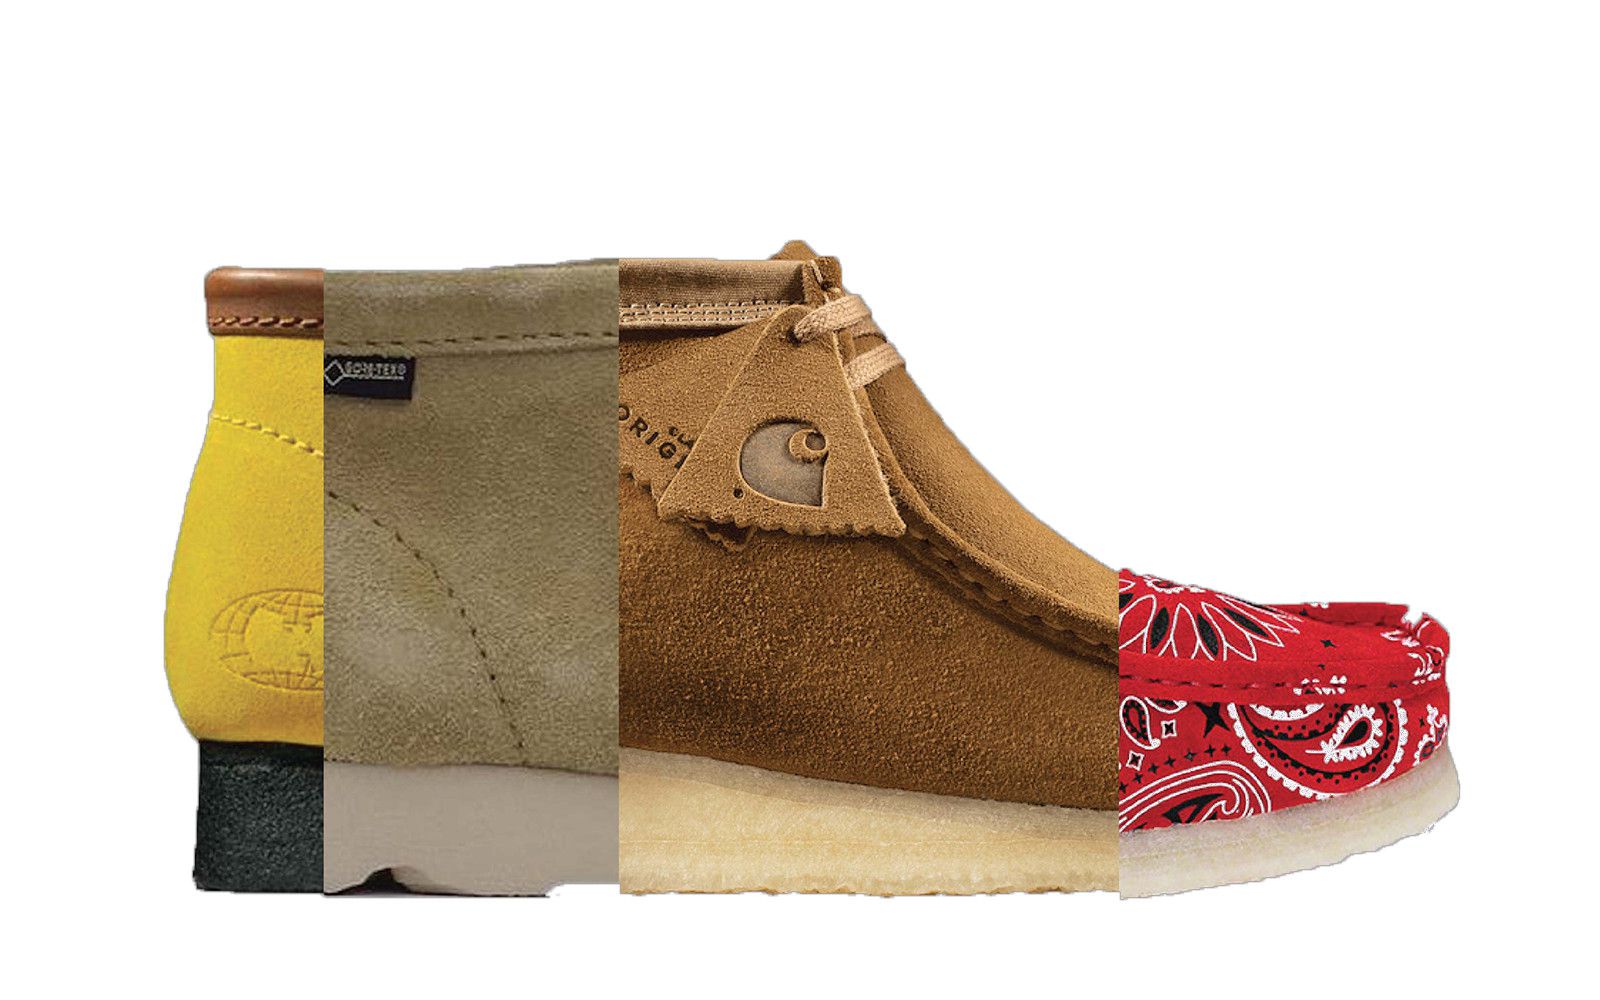 Clarks Wallabee boots: shoe of your grandfather and Wu-Tang